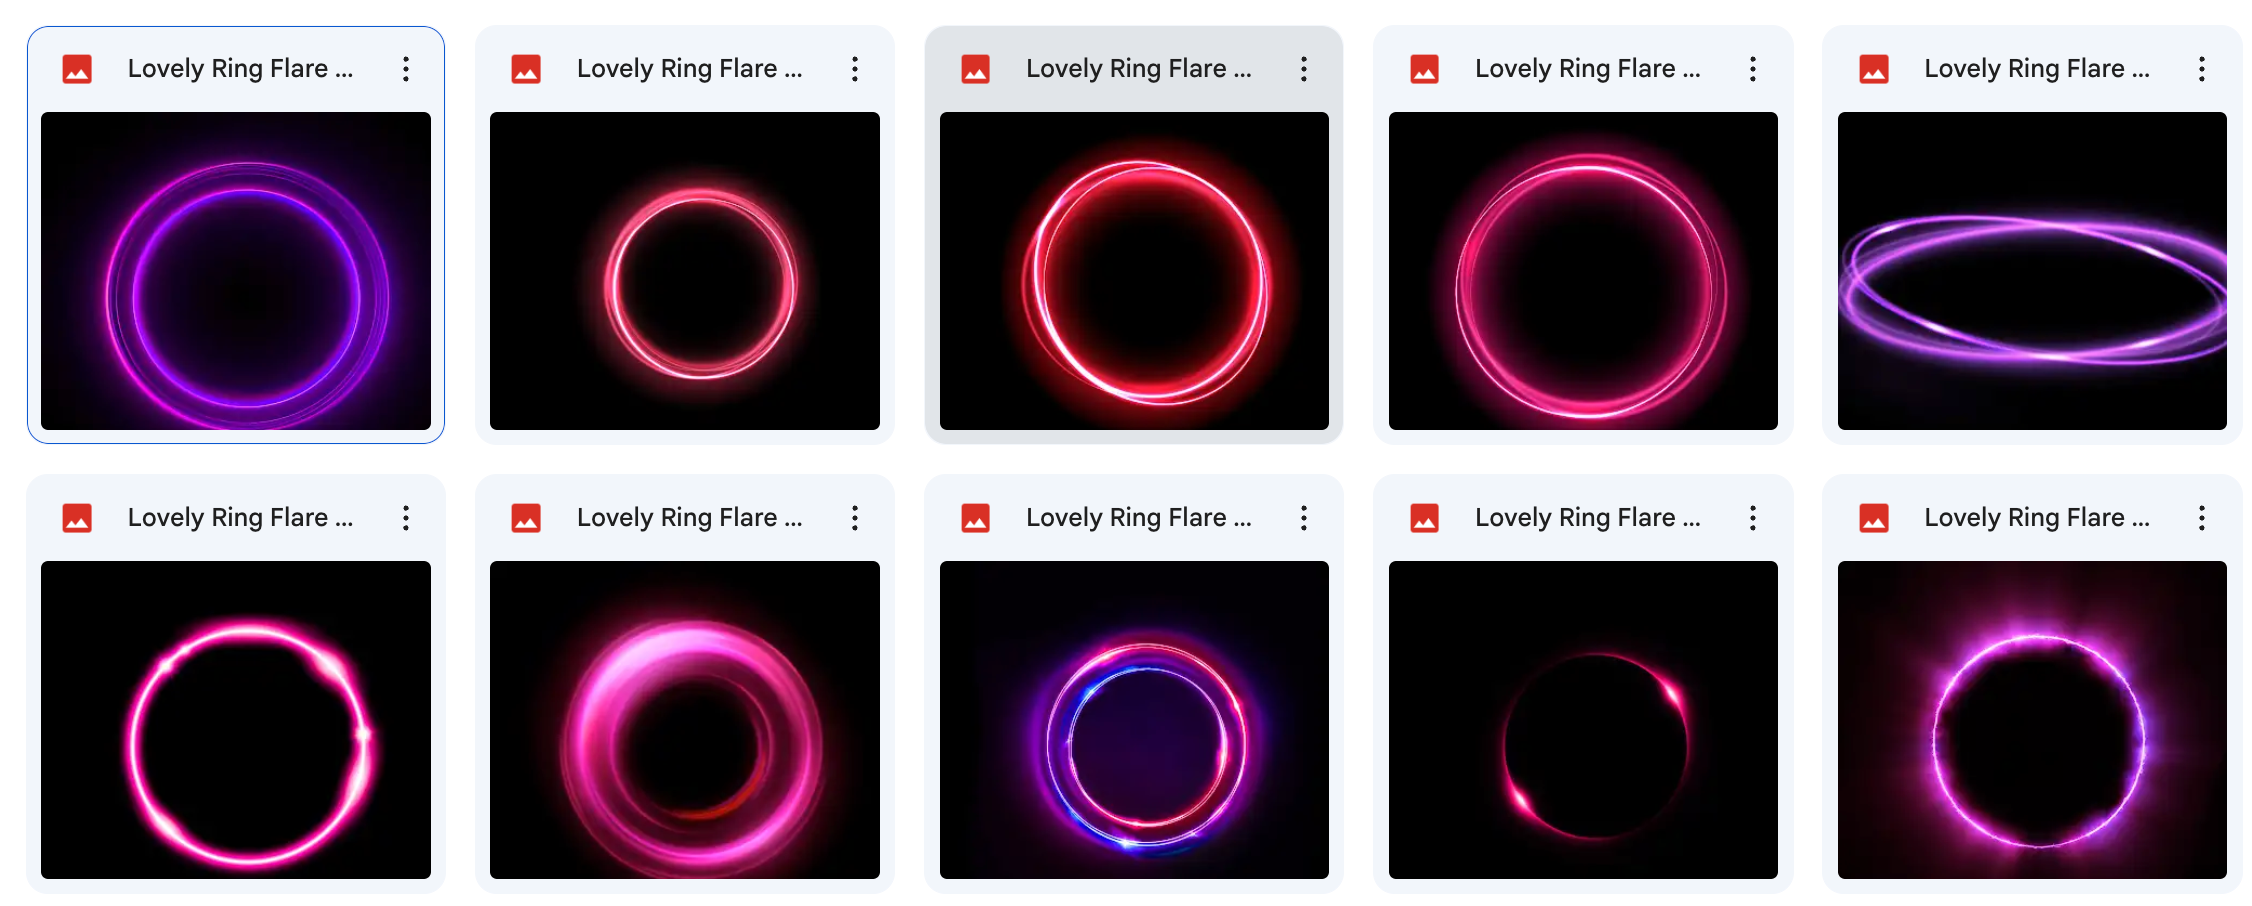 Magical Lovely Ring Flare Overlays - Meg Bitton Productions